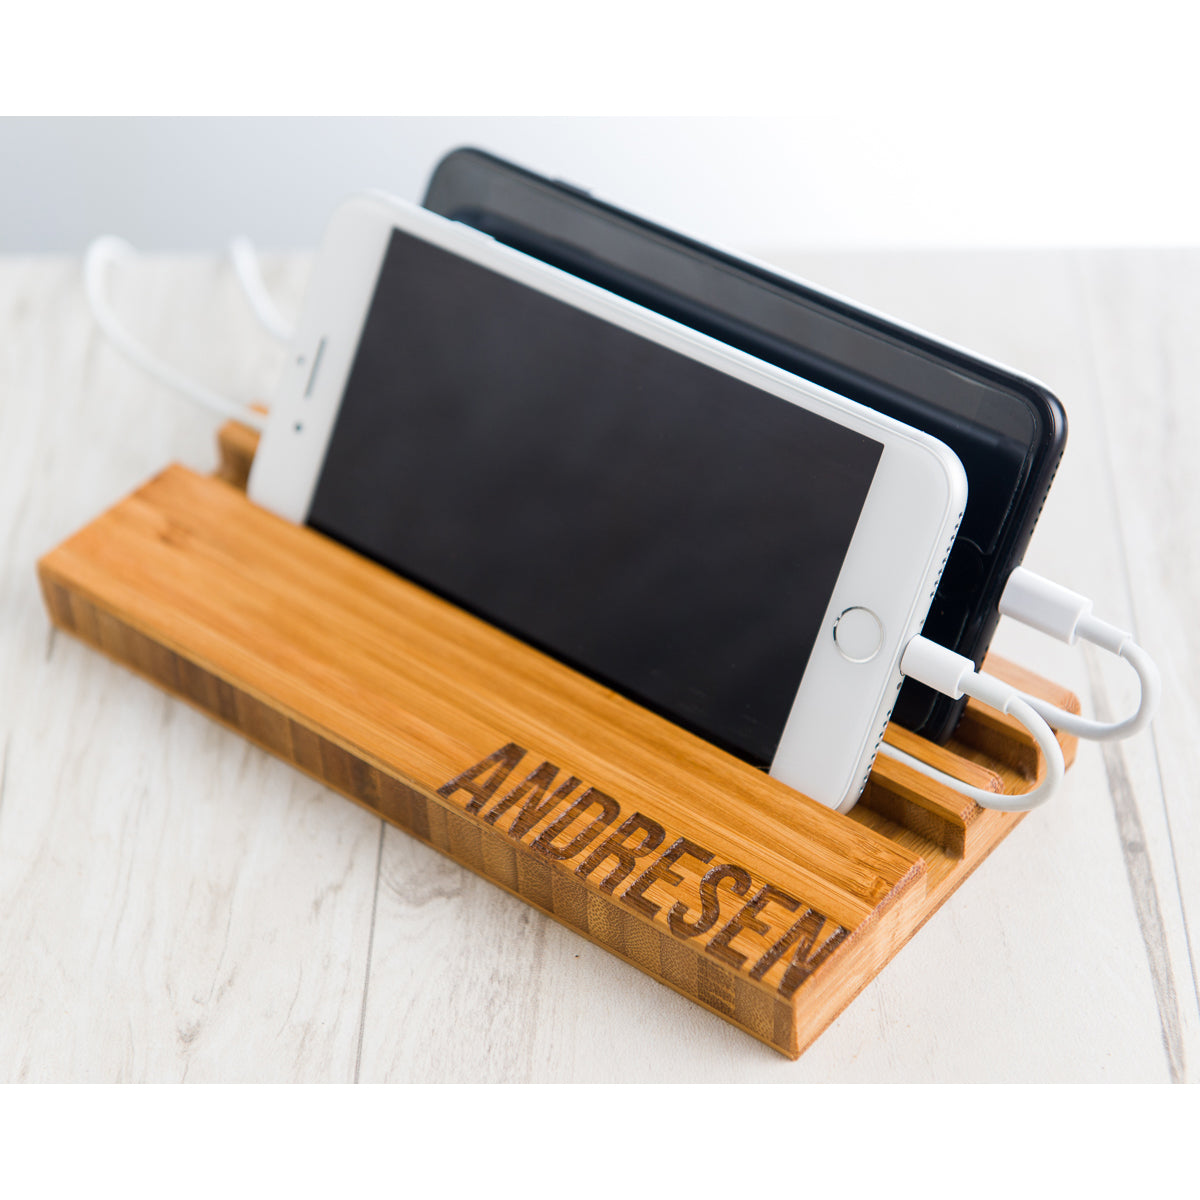 The Double Slot Personalized Phone Charging Dock